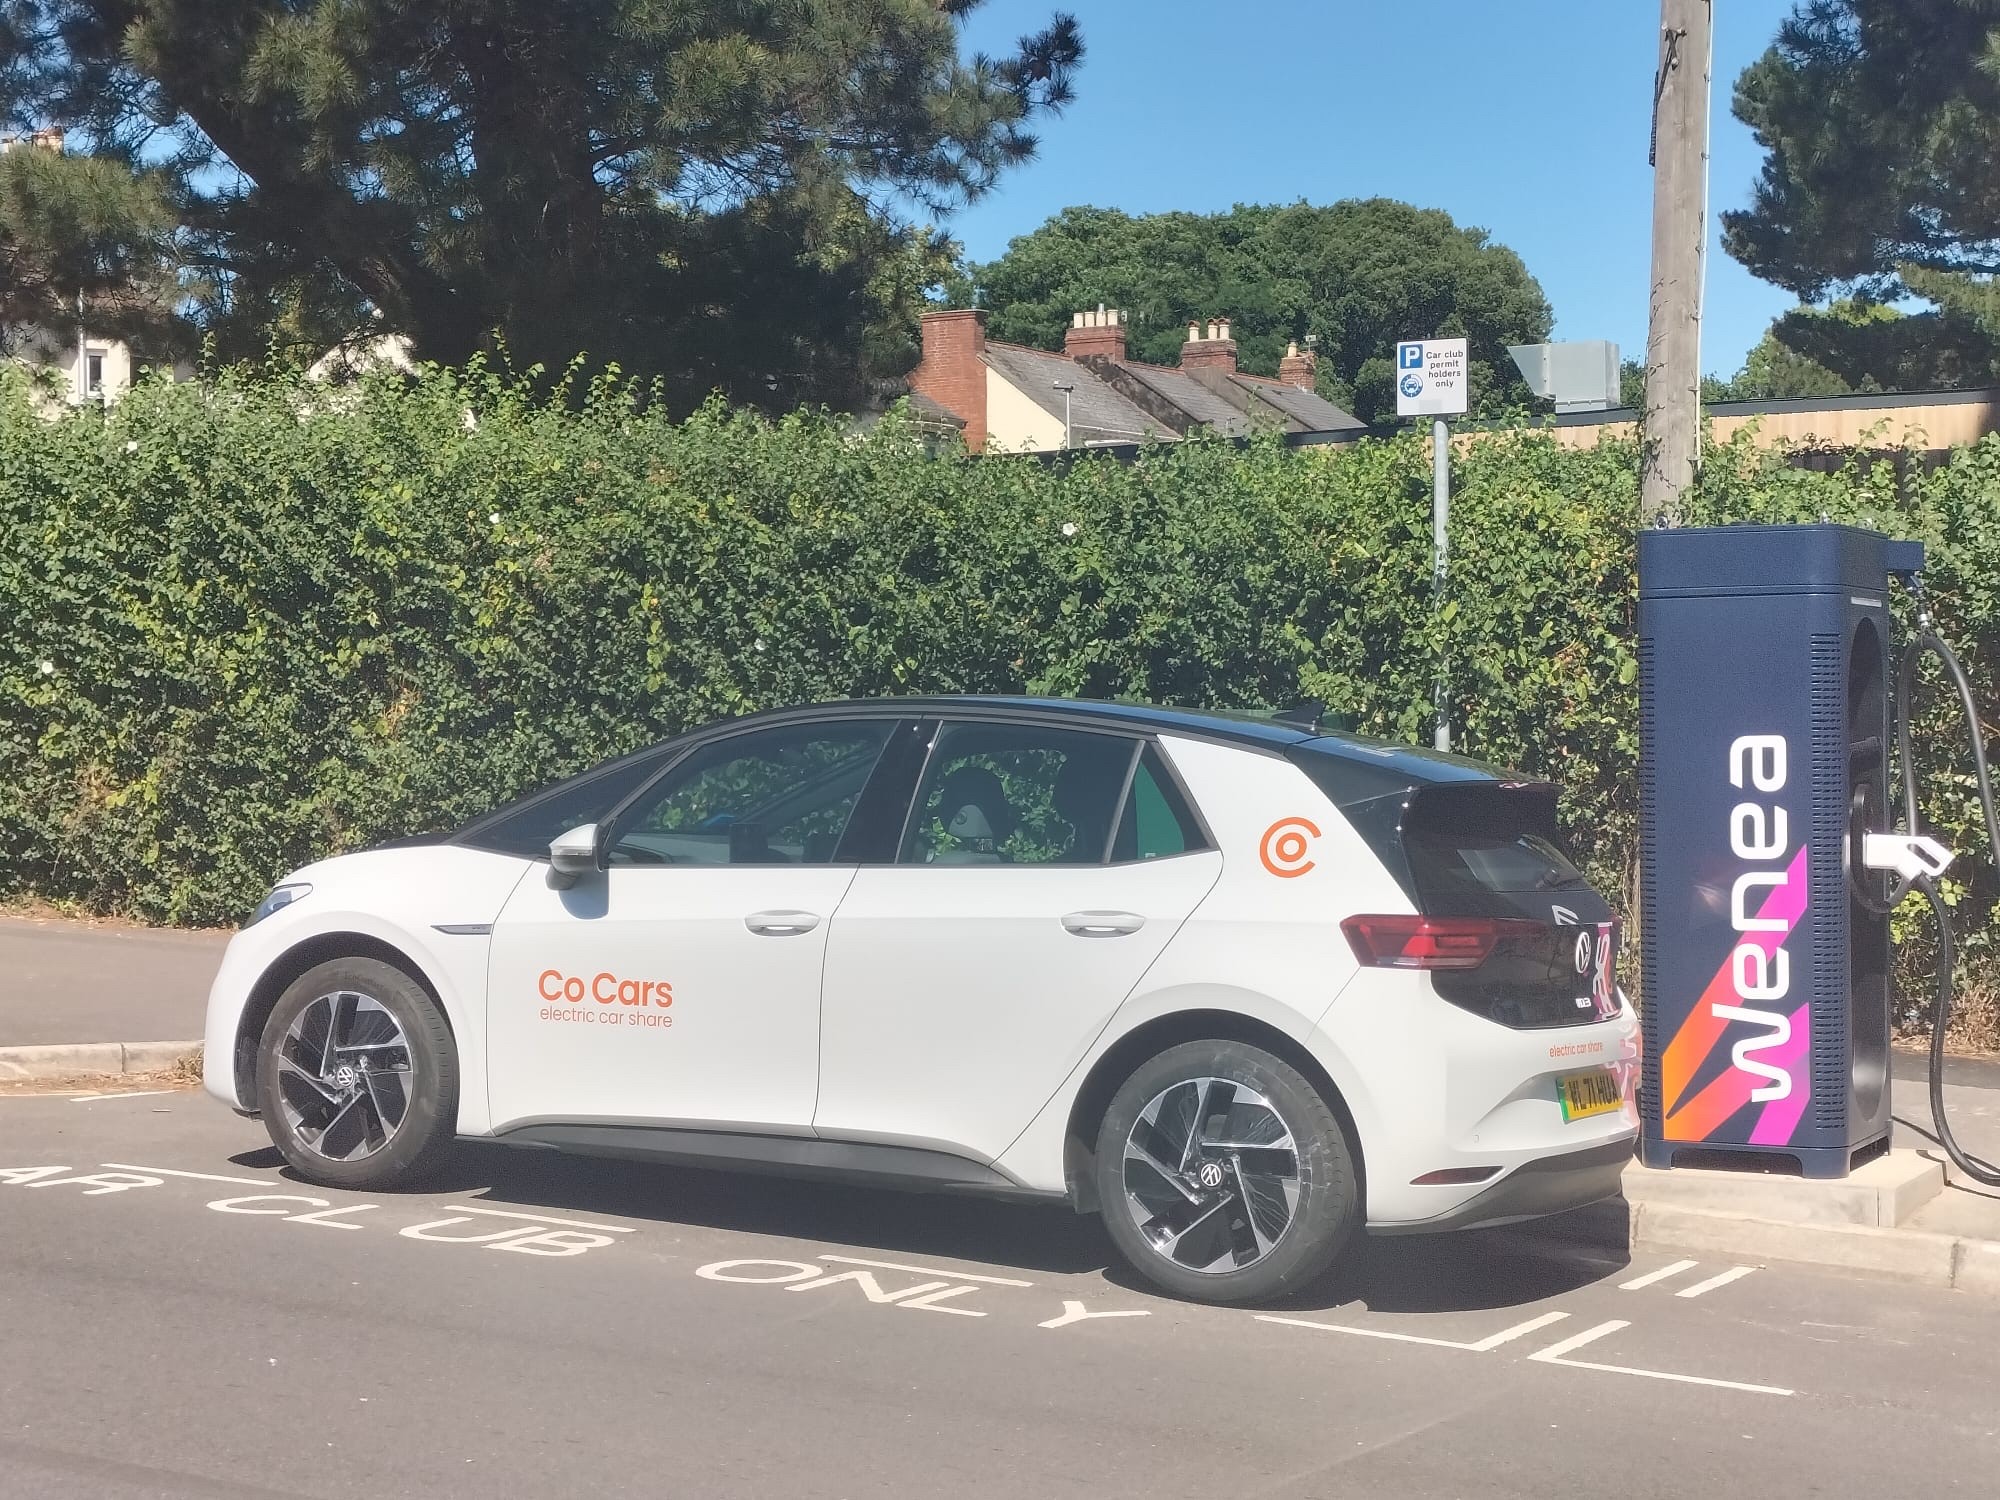 Rapid Charging Devon charger with a Co Car plugged in